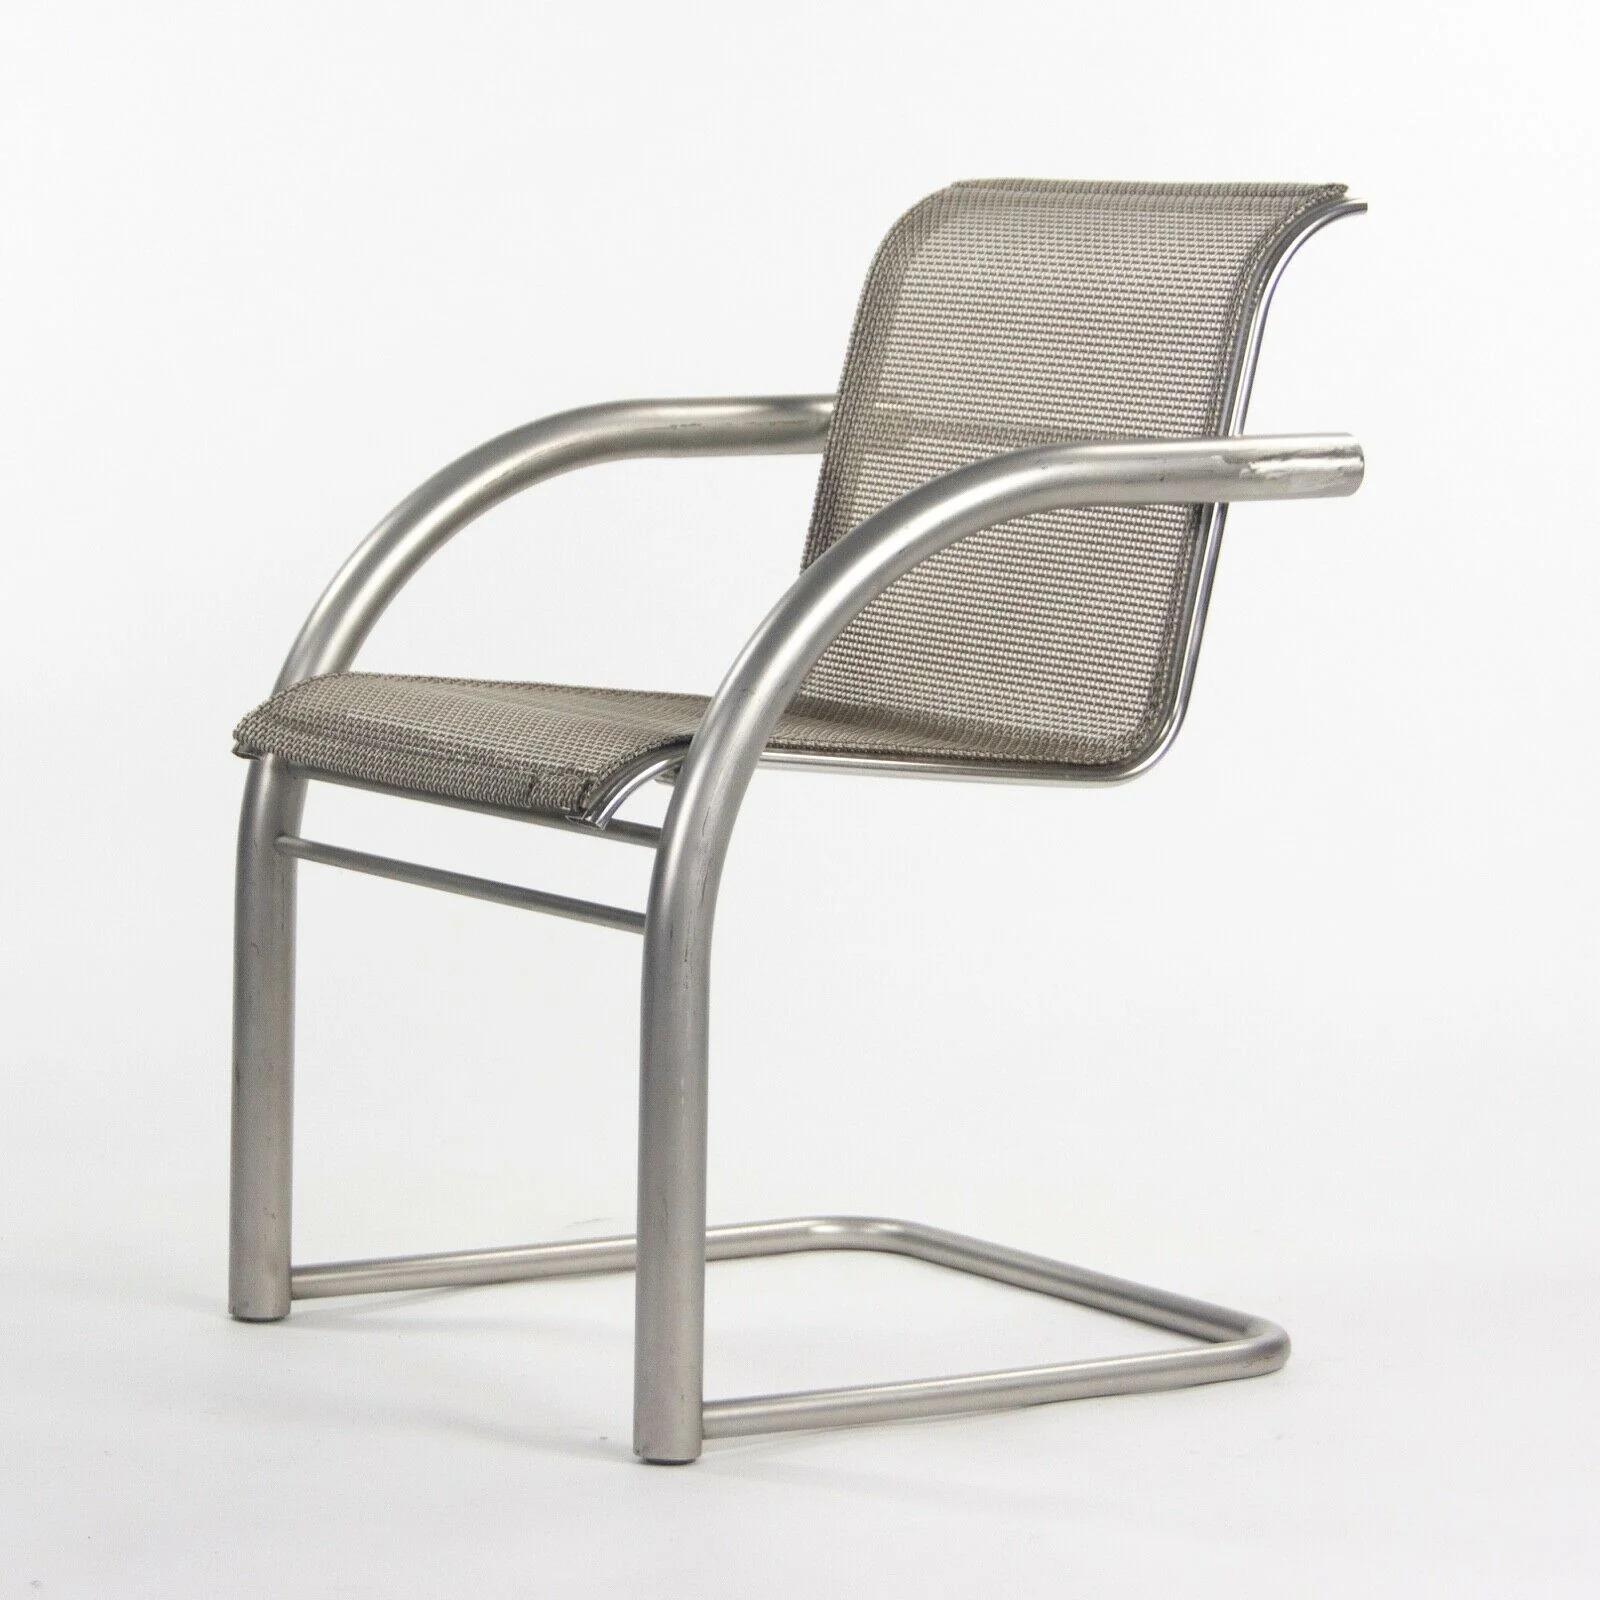 2001 Prototype Richard Schultz 2002 Collection Mesh Cantilever Dining Chair For Sale 1